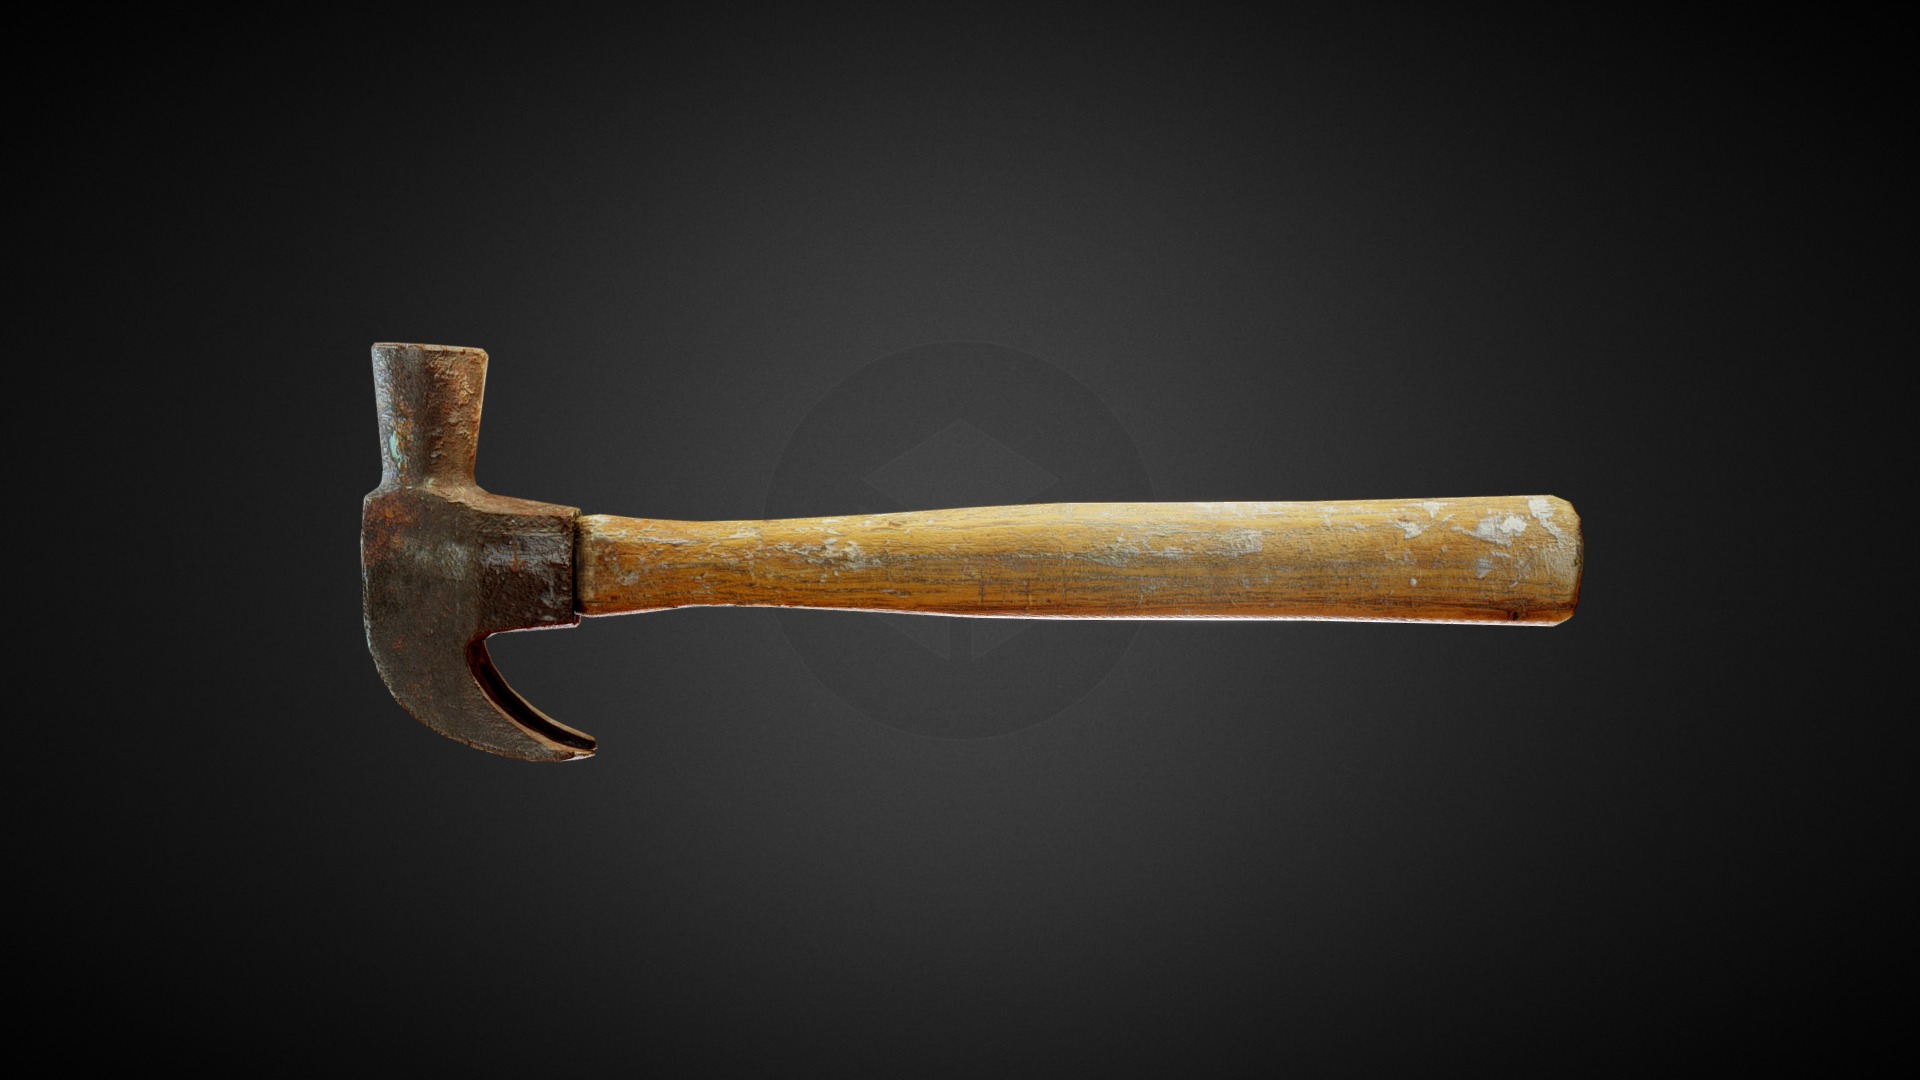 3D model Old Hammer - This is a 3D model of the Old Hammer. The 3D model is about a wooden gavel on a black background.